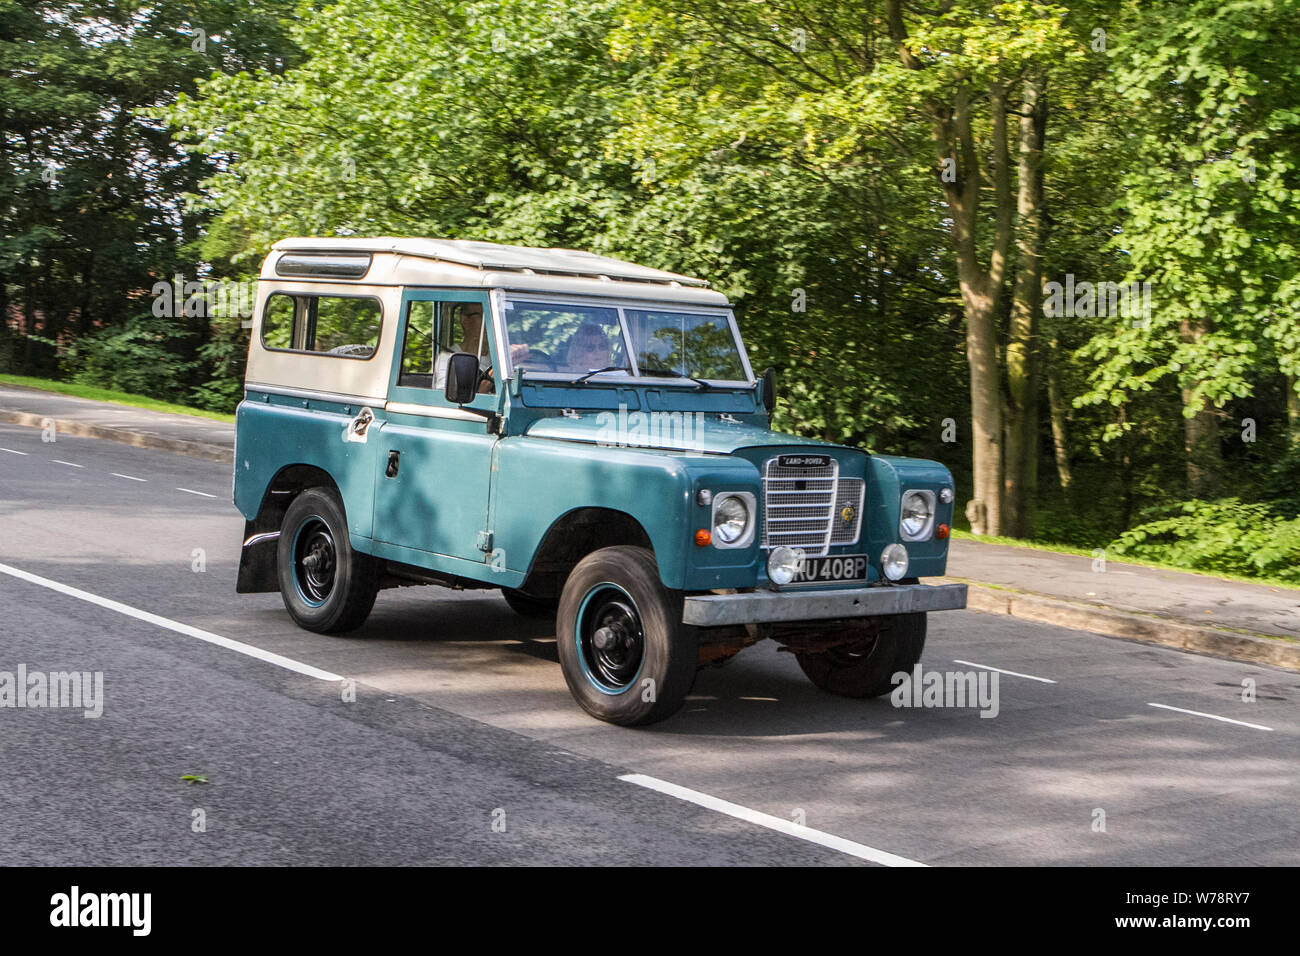 Motoring classics, historics, vintage motors and collectibles 2019; Lytham Hall transport show, collection of cars & veteran vehicles of yesteryear. Stock Photo